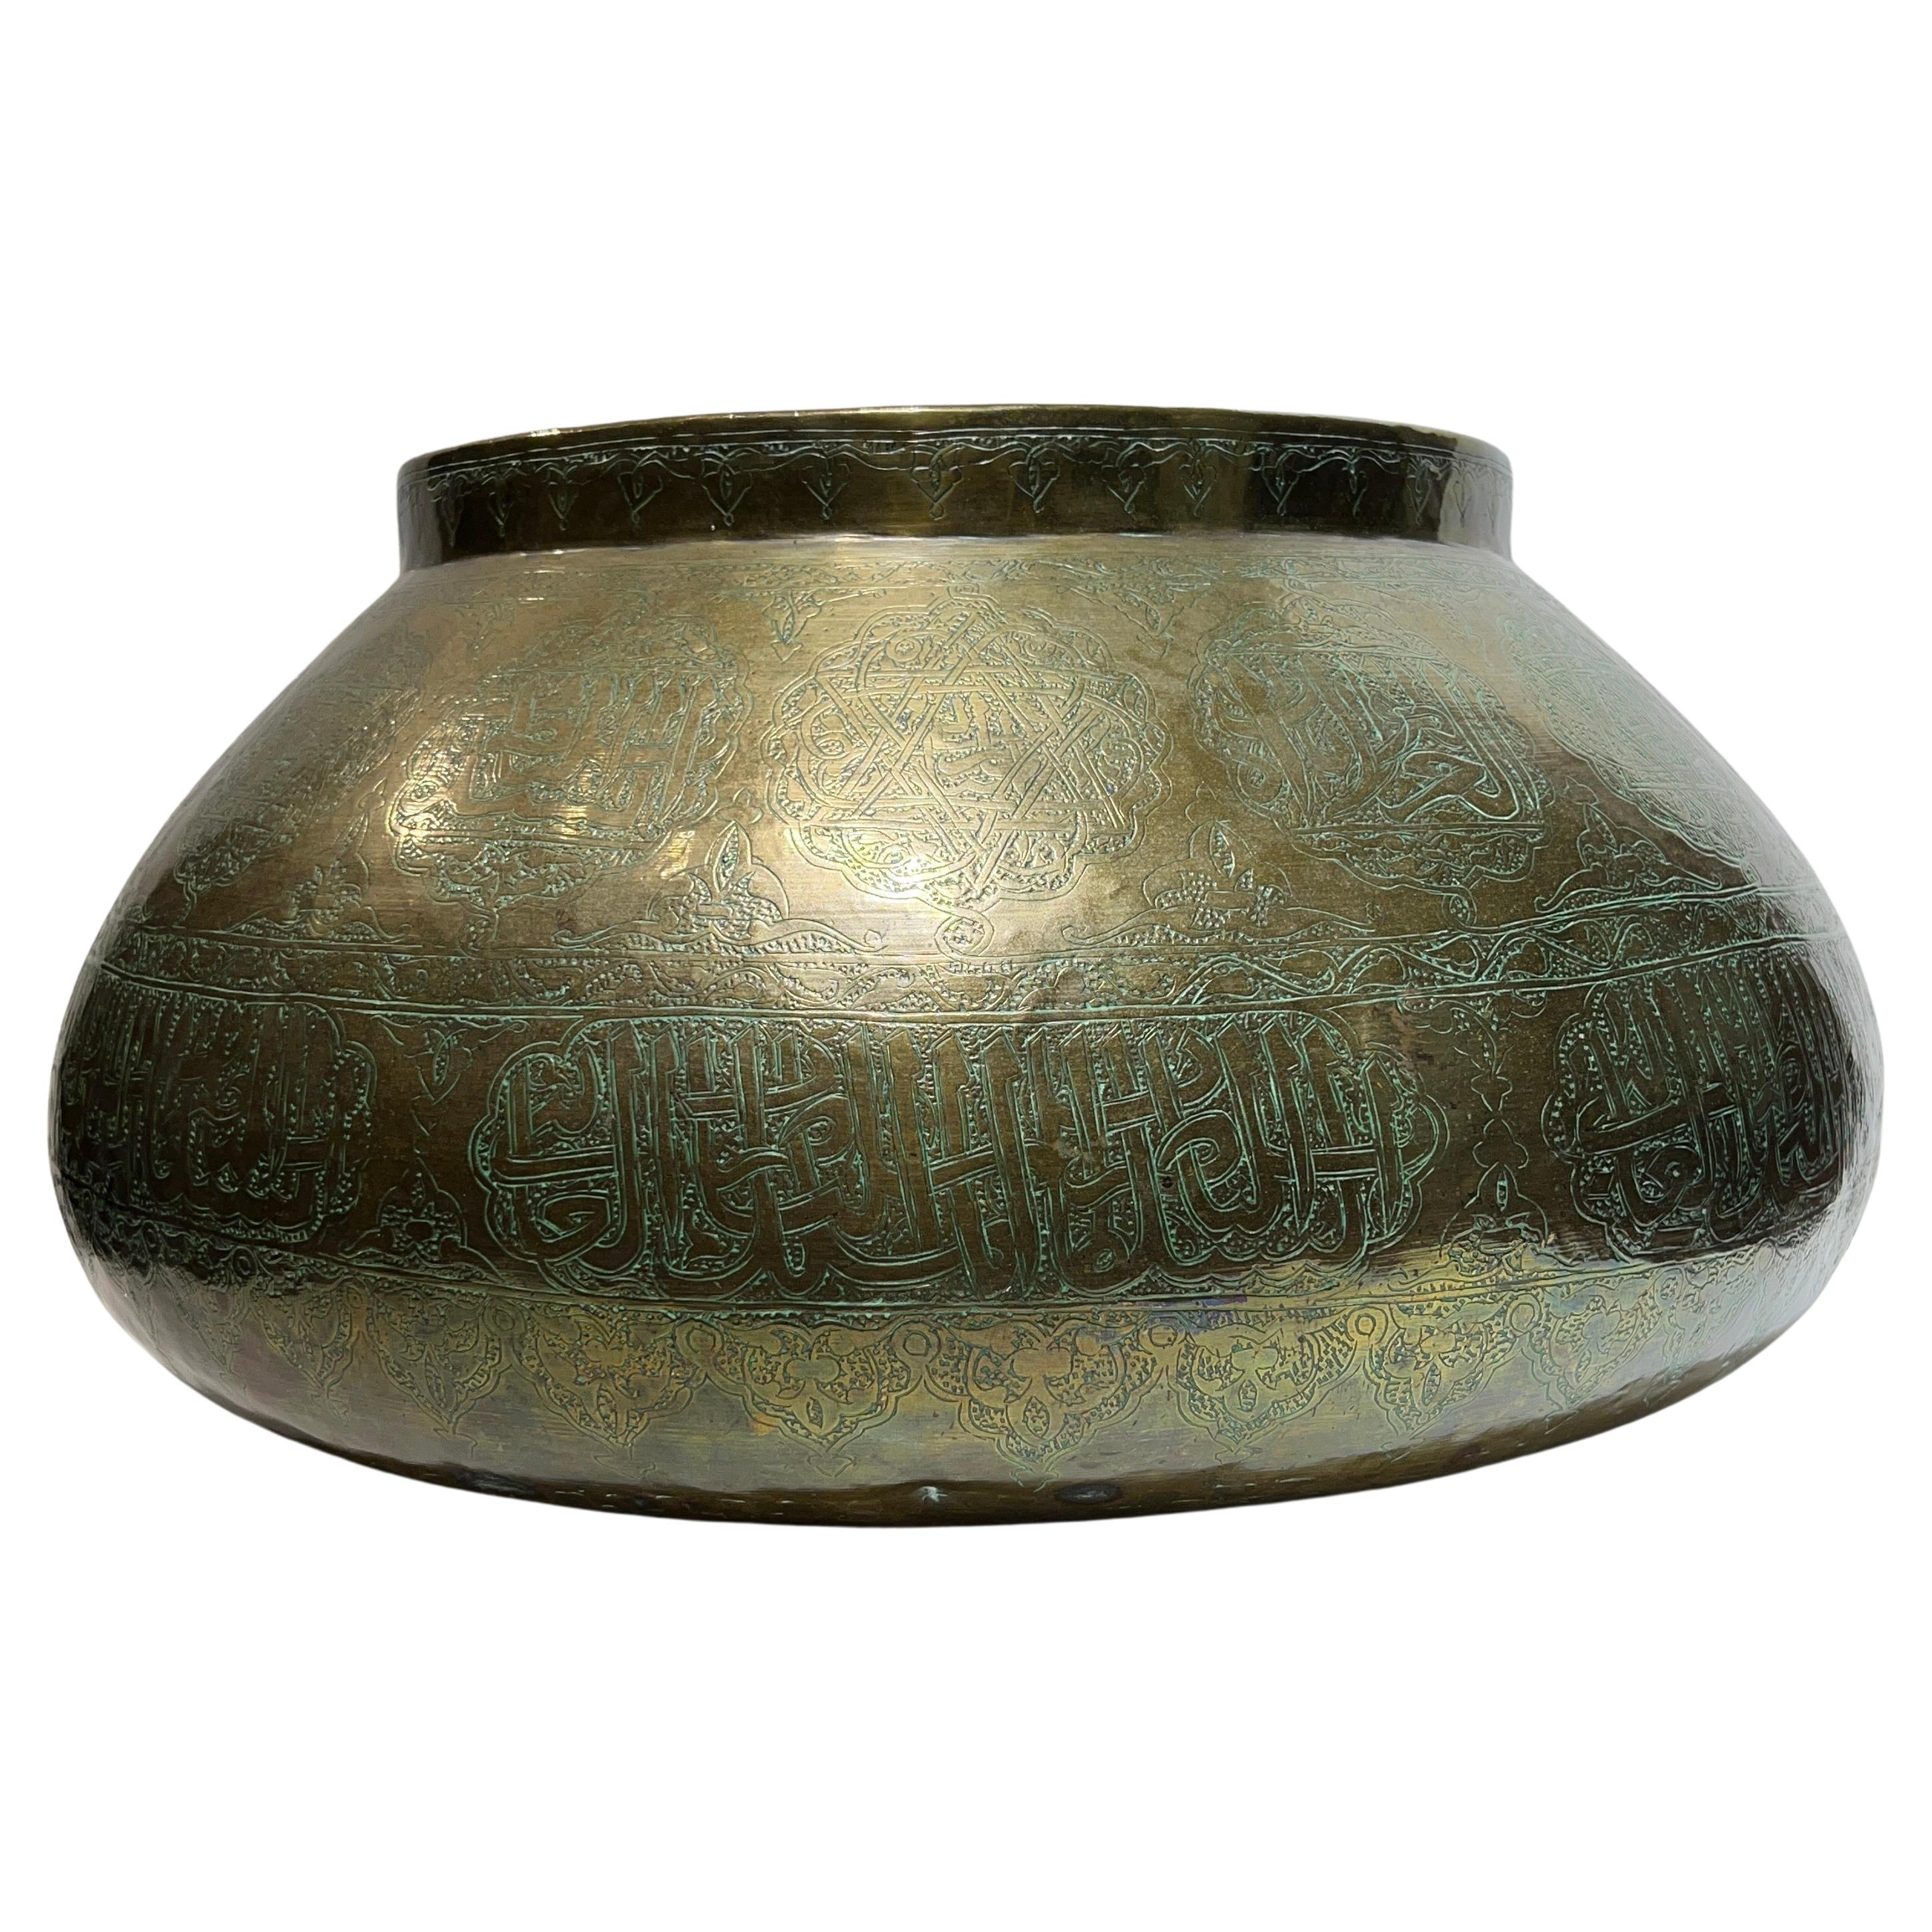 Large 19th Century Islamic Middle Eastern Engraved Brass Centerpiece Bowl